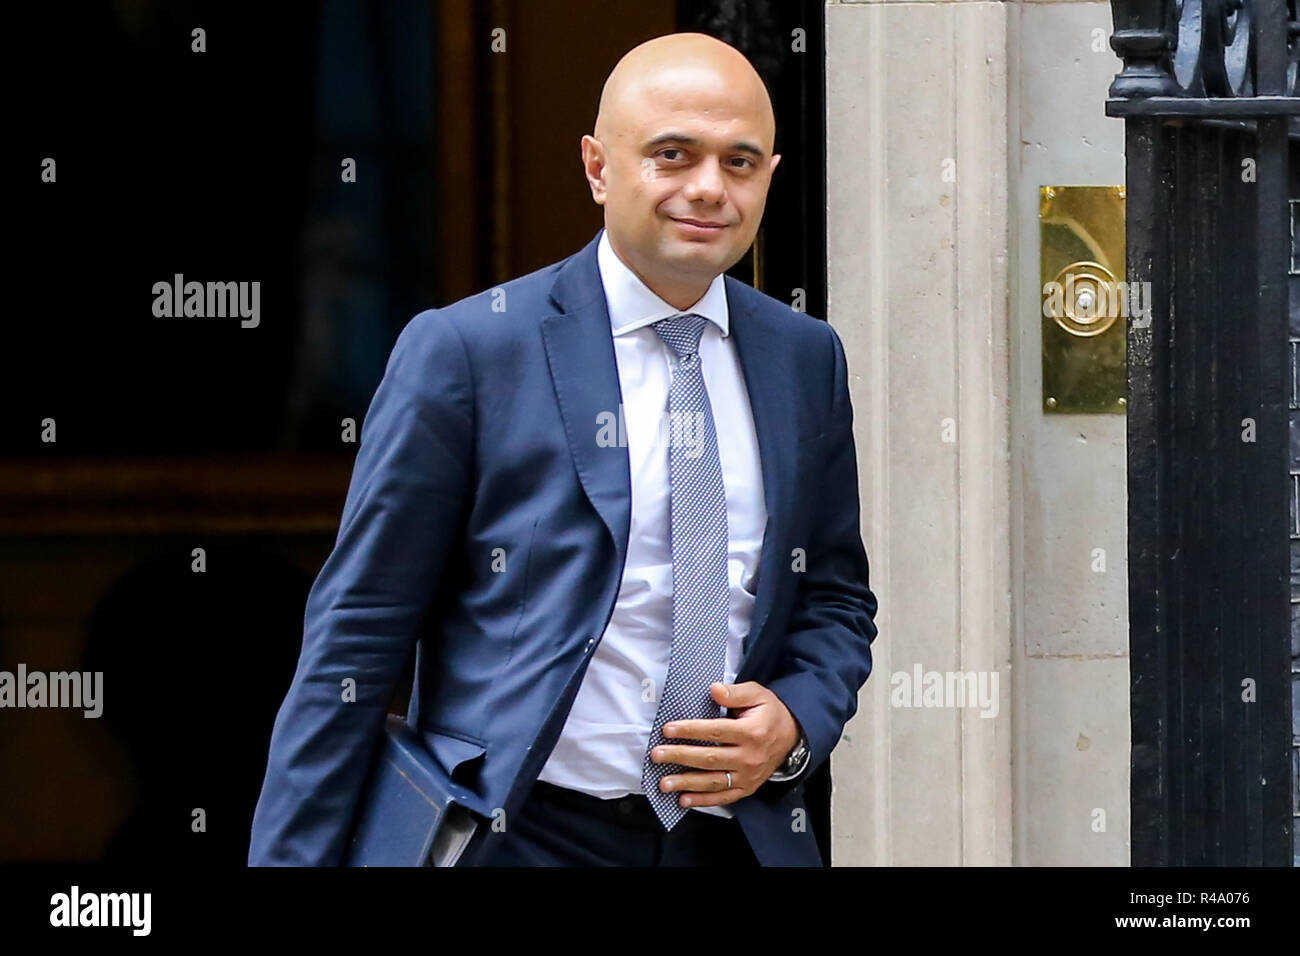 Downing Street, London, UK 26 Nov 2018 - Sajid Javid - Home Secretary departs from No 10 Downing Street after attending the weekly Cabinet Meeting.  Credit: Dinendra Haria/Alamy Live News Stock Photo